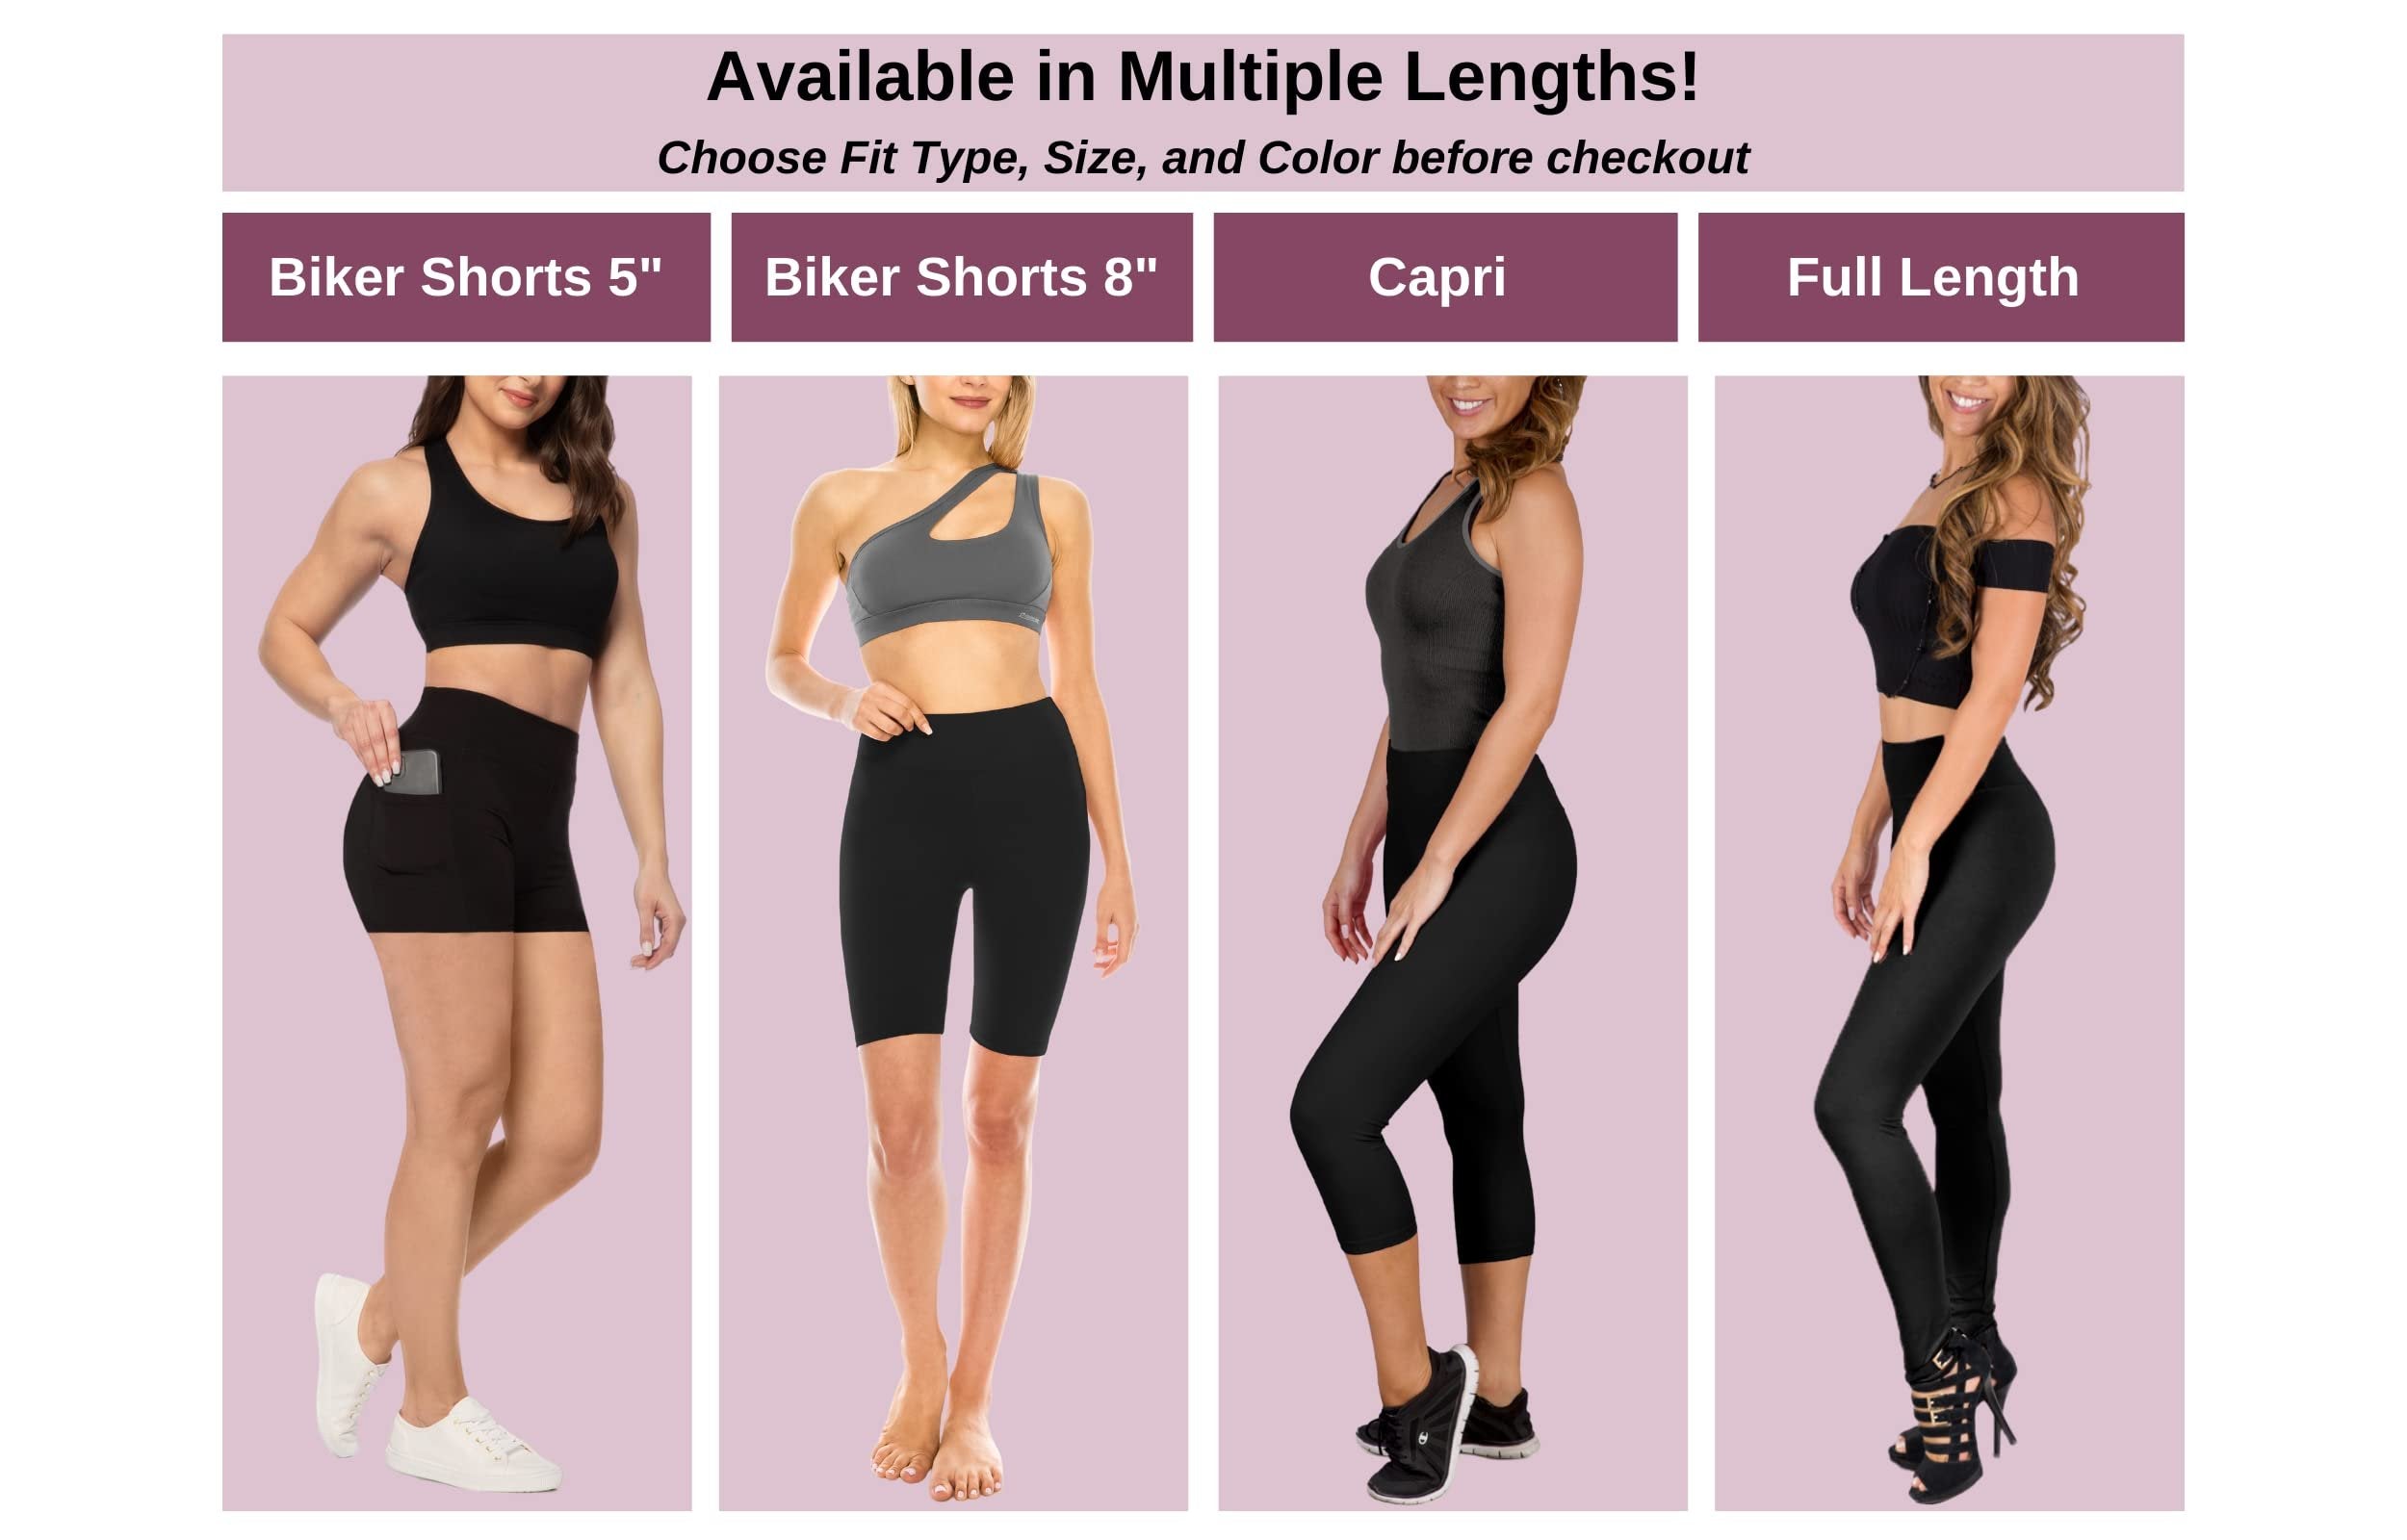 SATINA Olive Leggings for Women with Pockets | High Waisted Workout Leggings | Yoga Leggings for Women | 3 Waistband | Plus and One Size Available